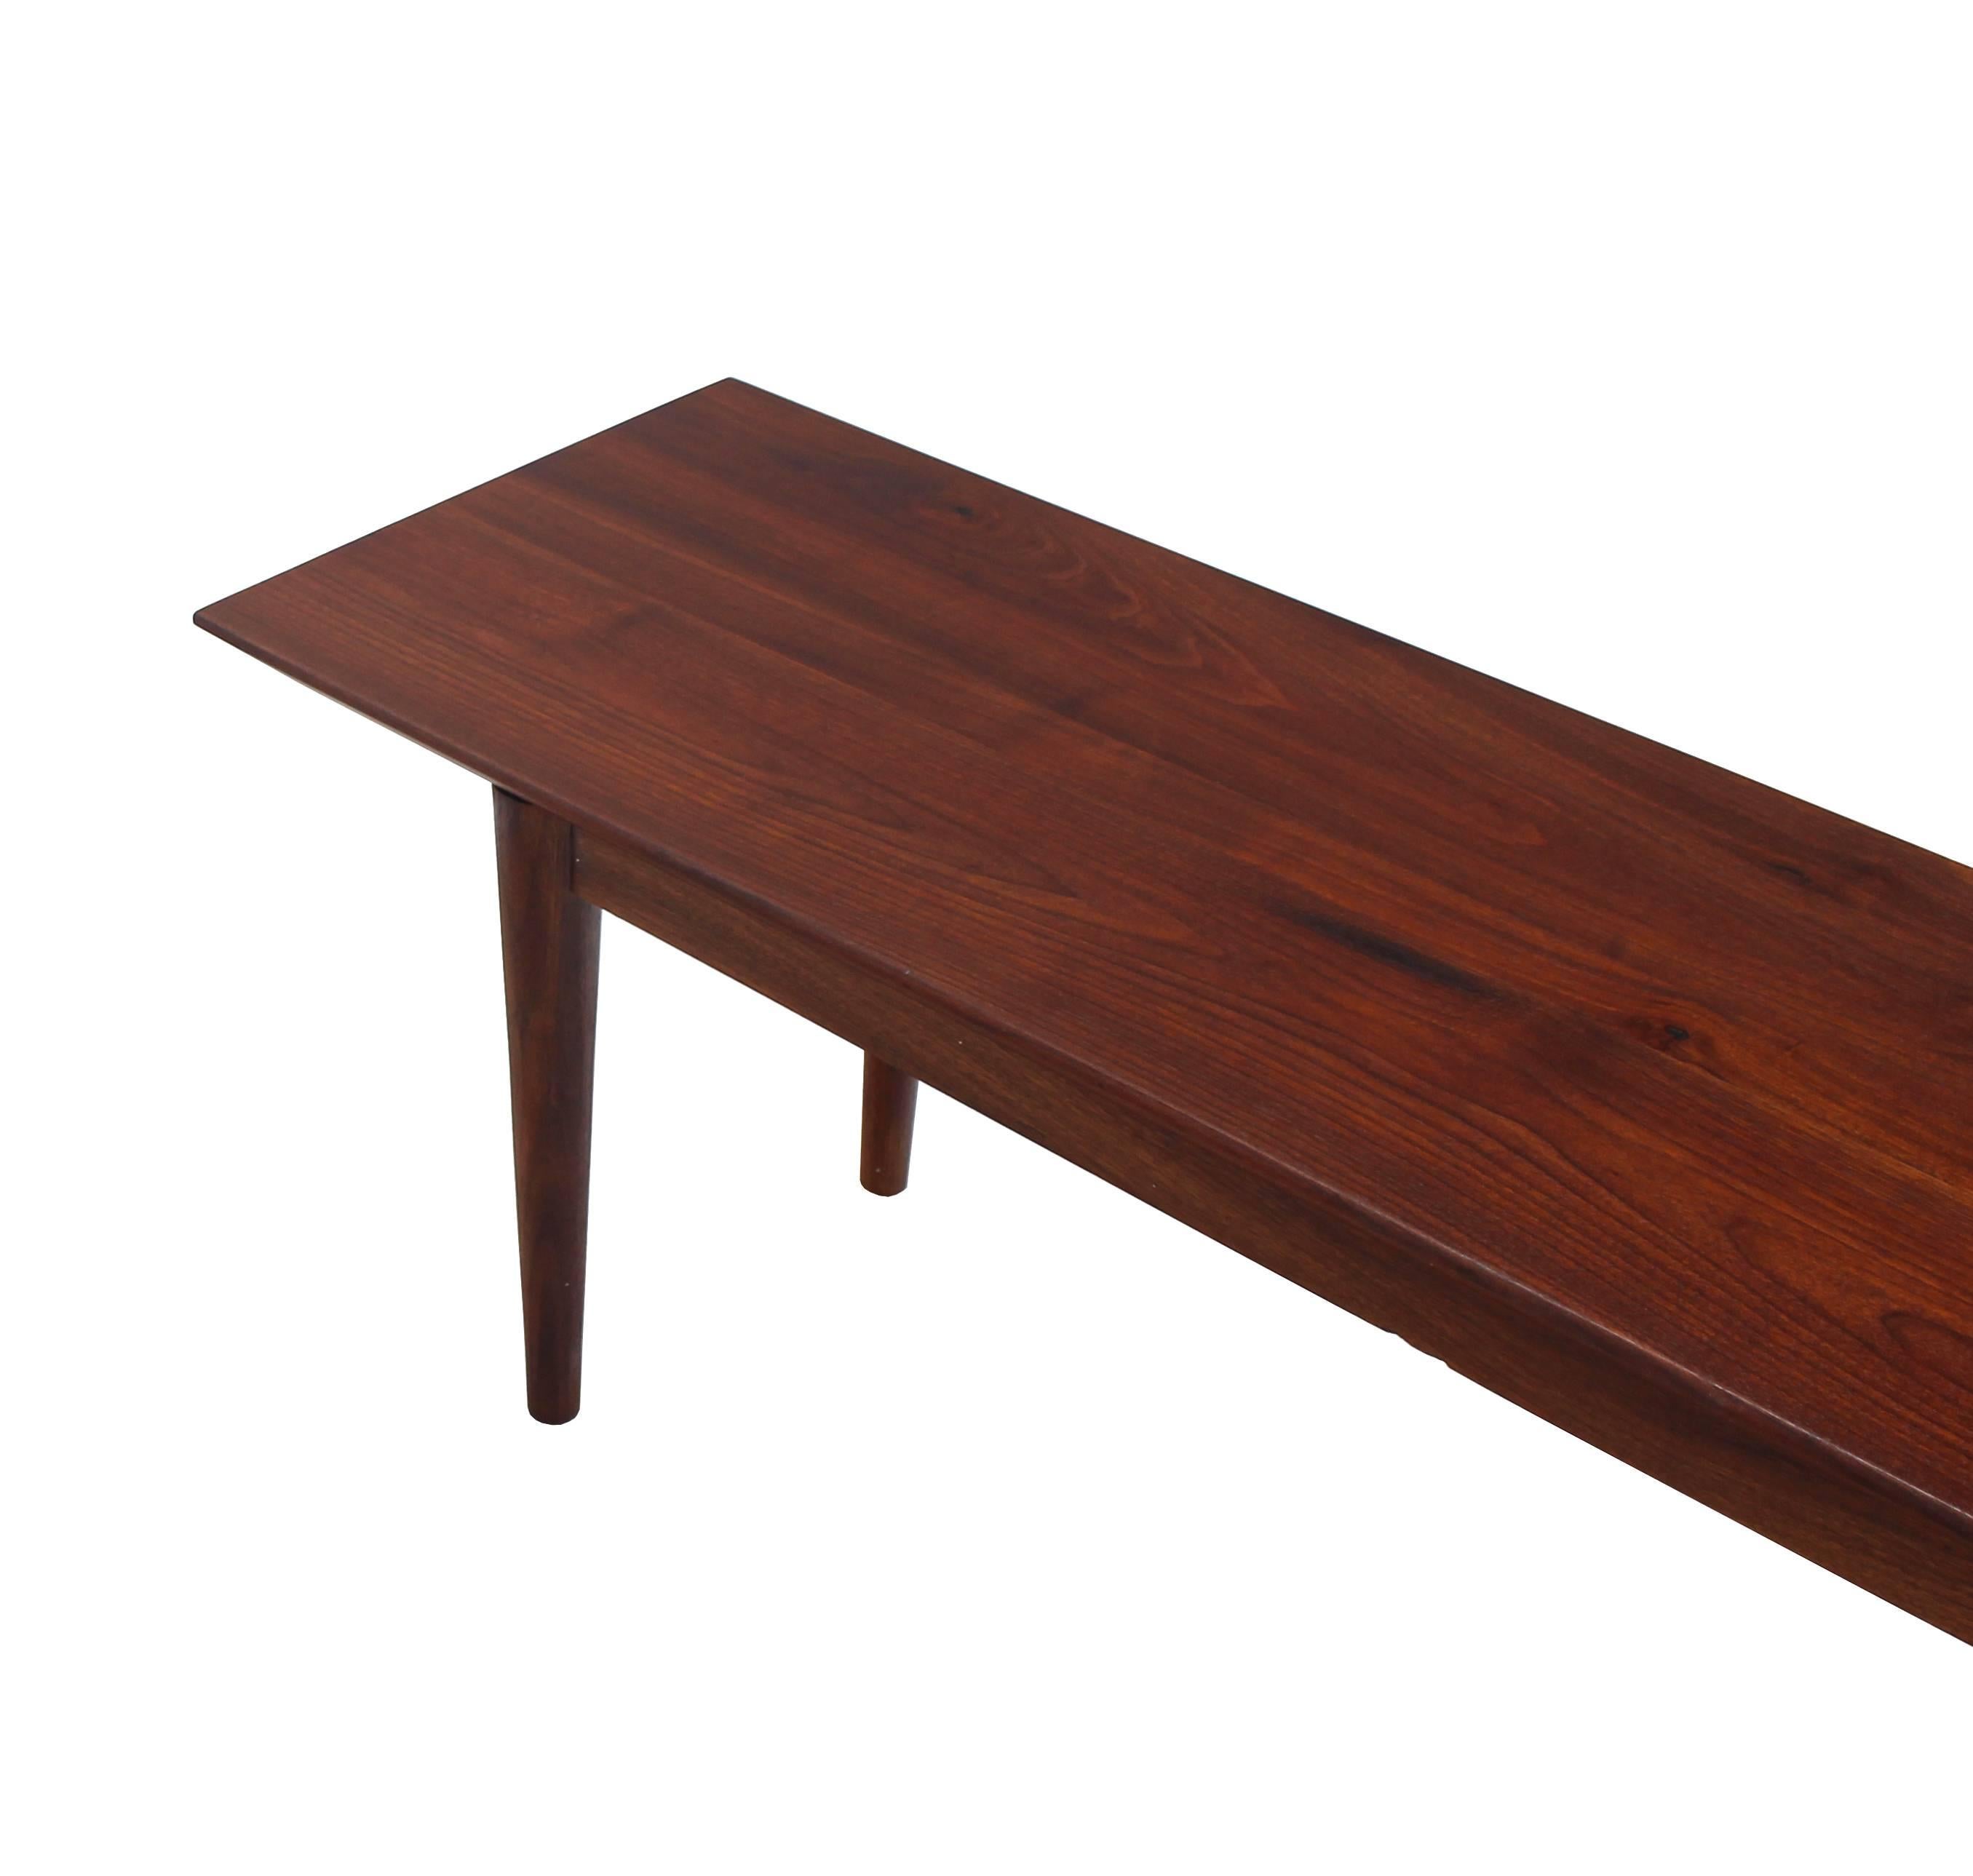 Rare Early Walnut Bench or Coffee Table by Risom In Good Condition For Sale In Rockaway, NJ